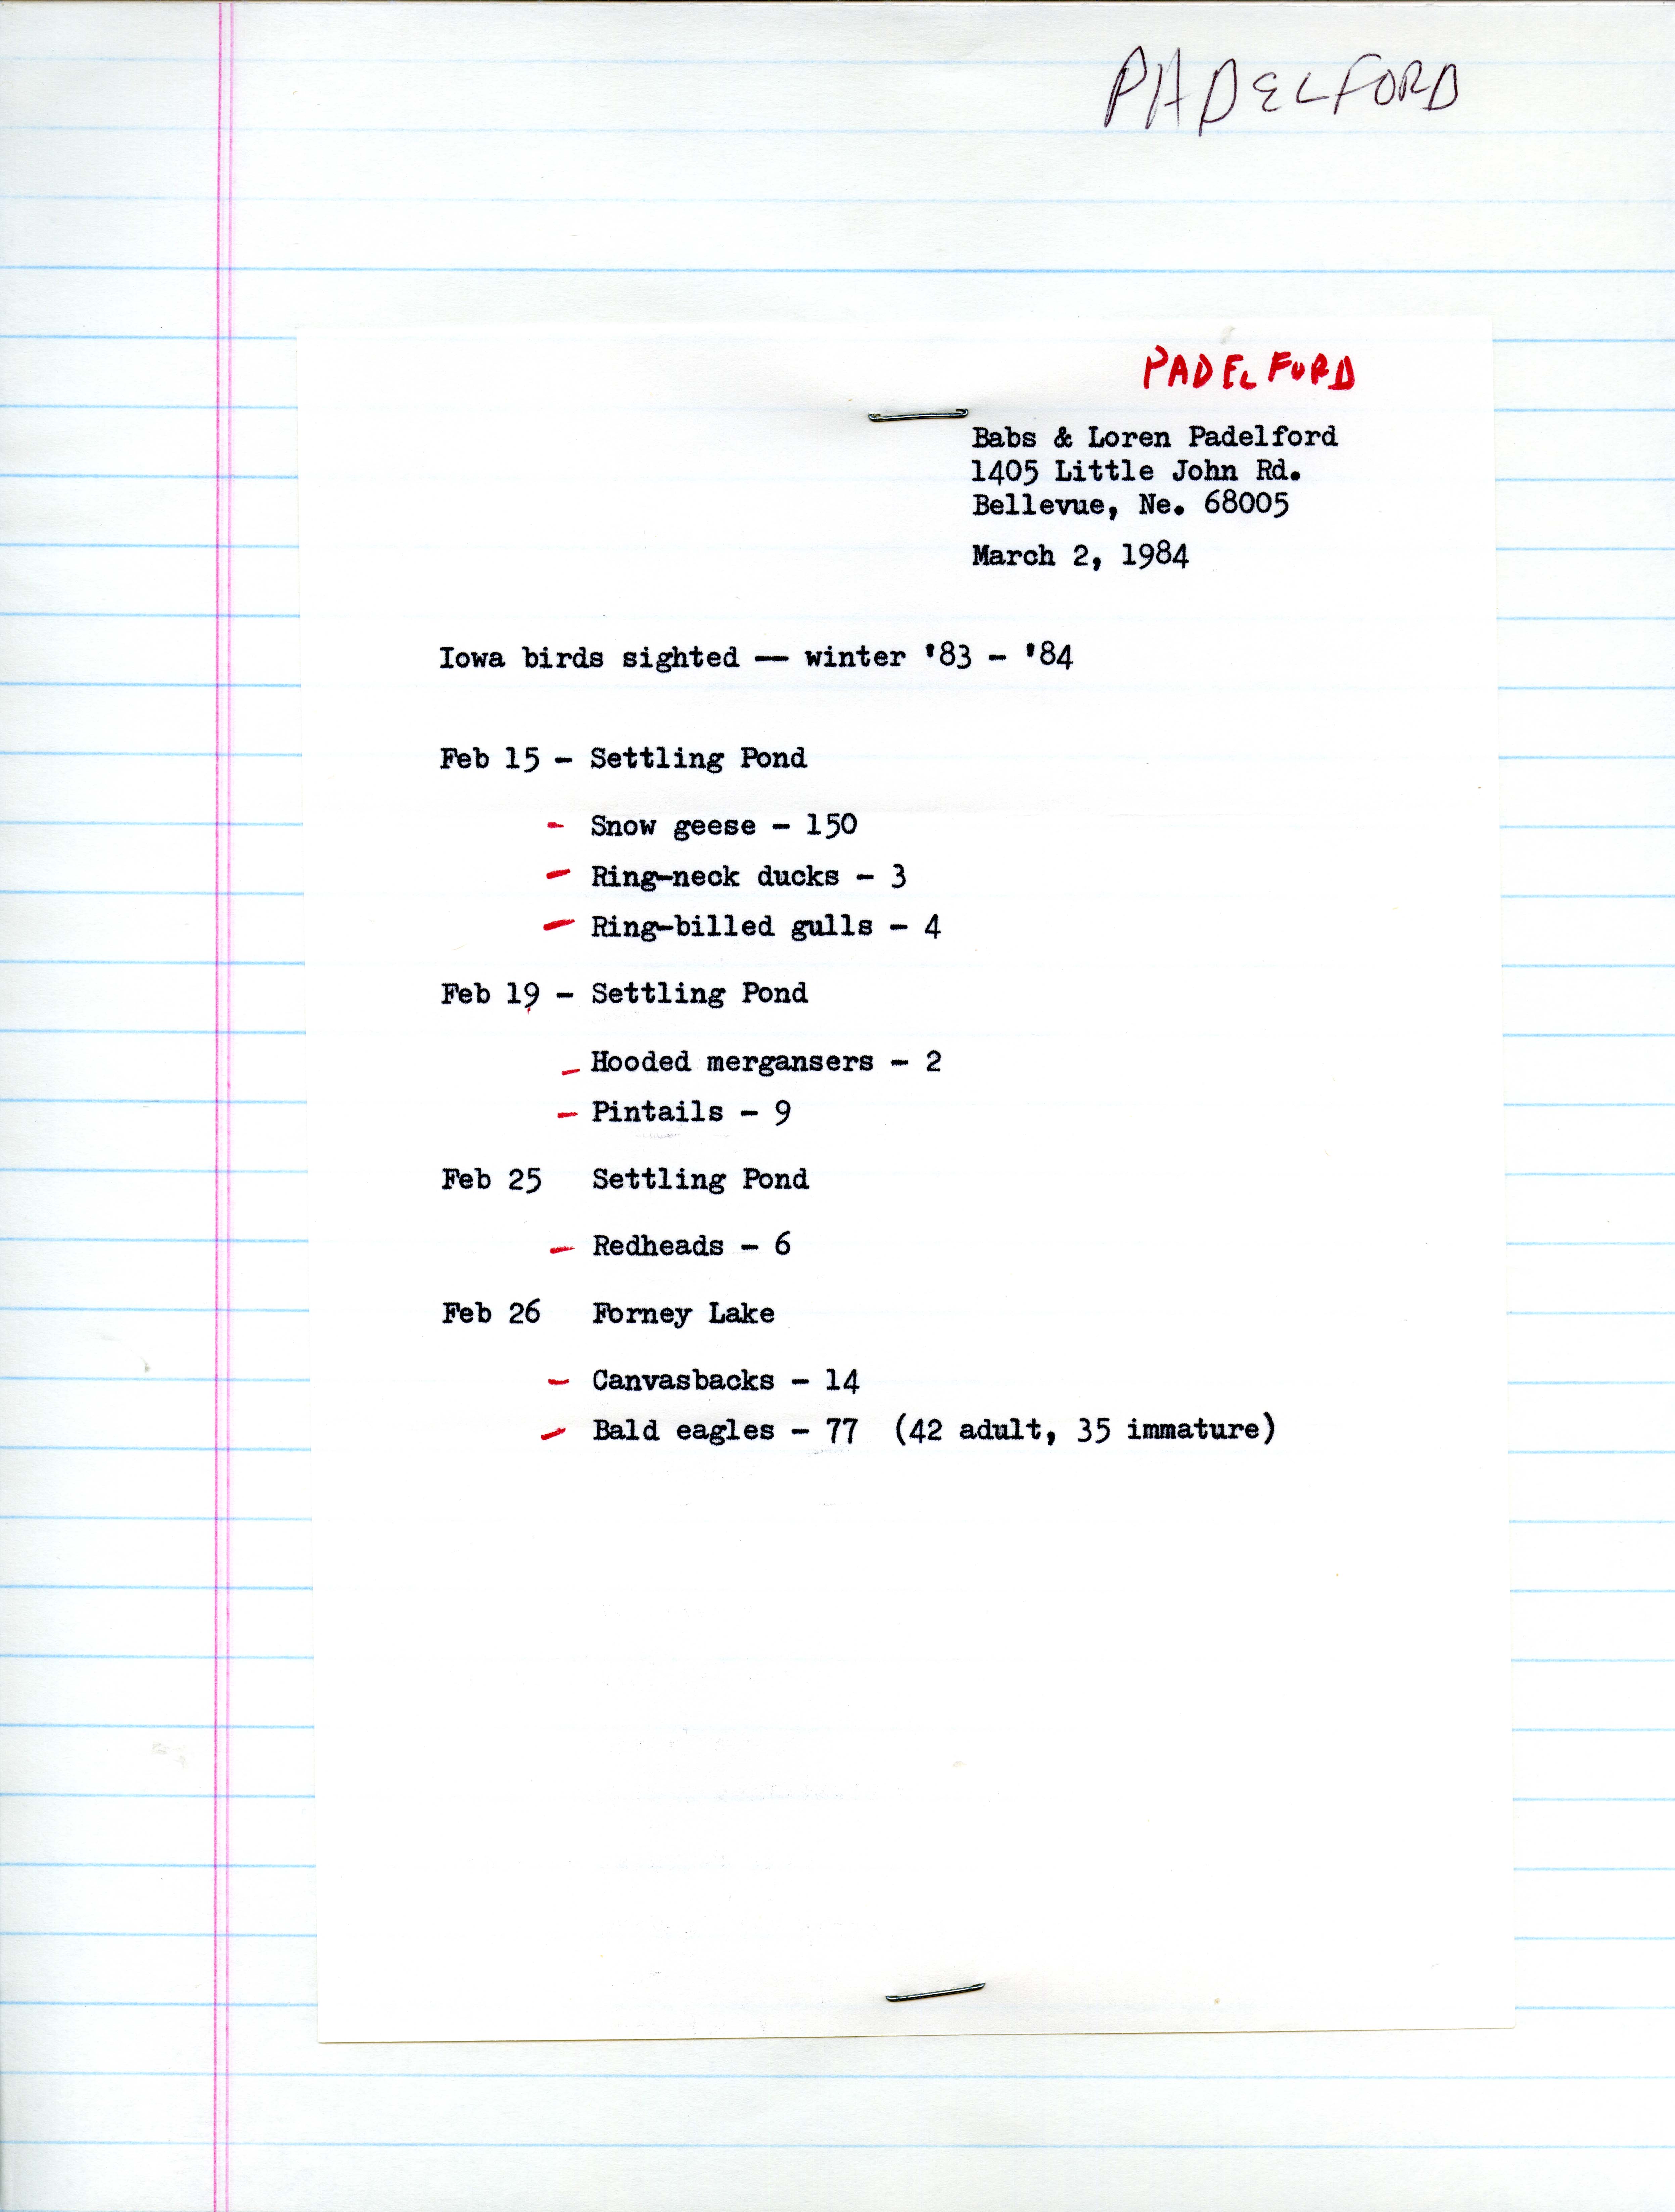 Field notes contributed by Babs and Loren Padelford on Iowa birds sighted, March 2, 1984